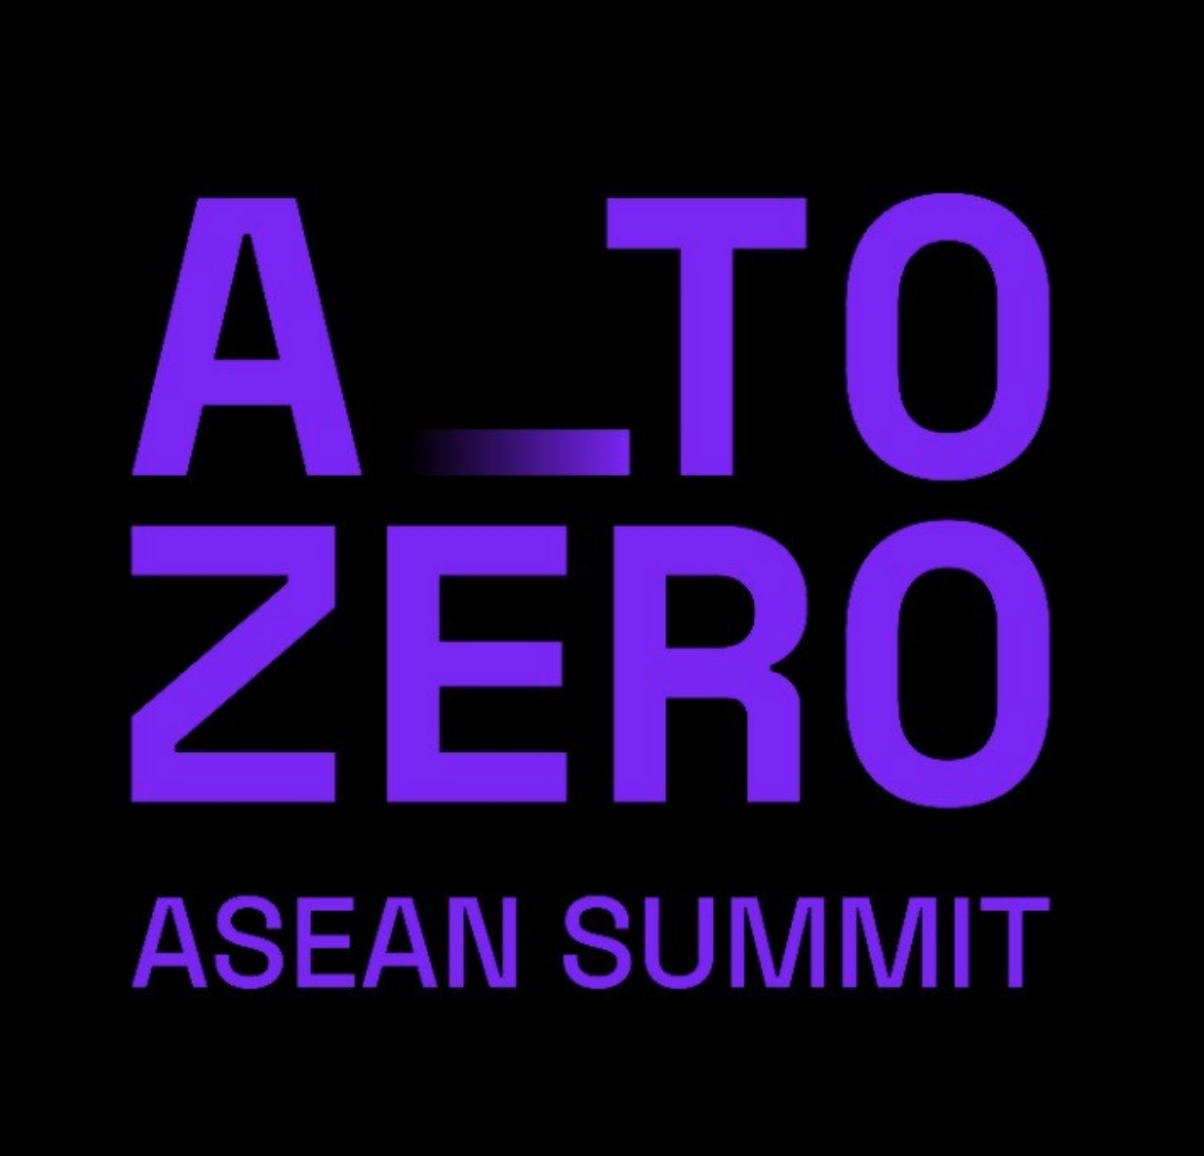 ATOZERO ASEAN 2023, POWERED BY GENTARI, TO FEATURE 100 LEADERSHIP SPEAKERS AND 1000 DELEGATES TO DRIVE NET ZERO DIALOGUES AND PARTNERSHIPS